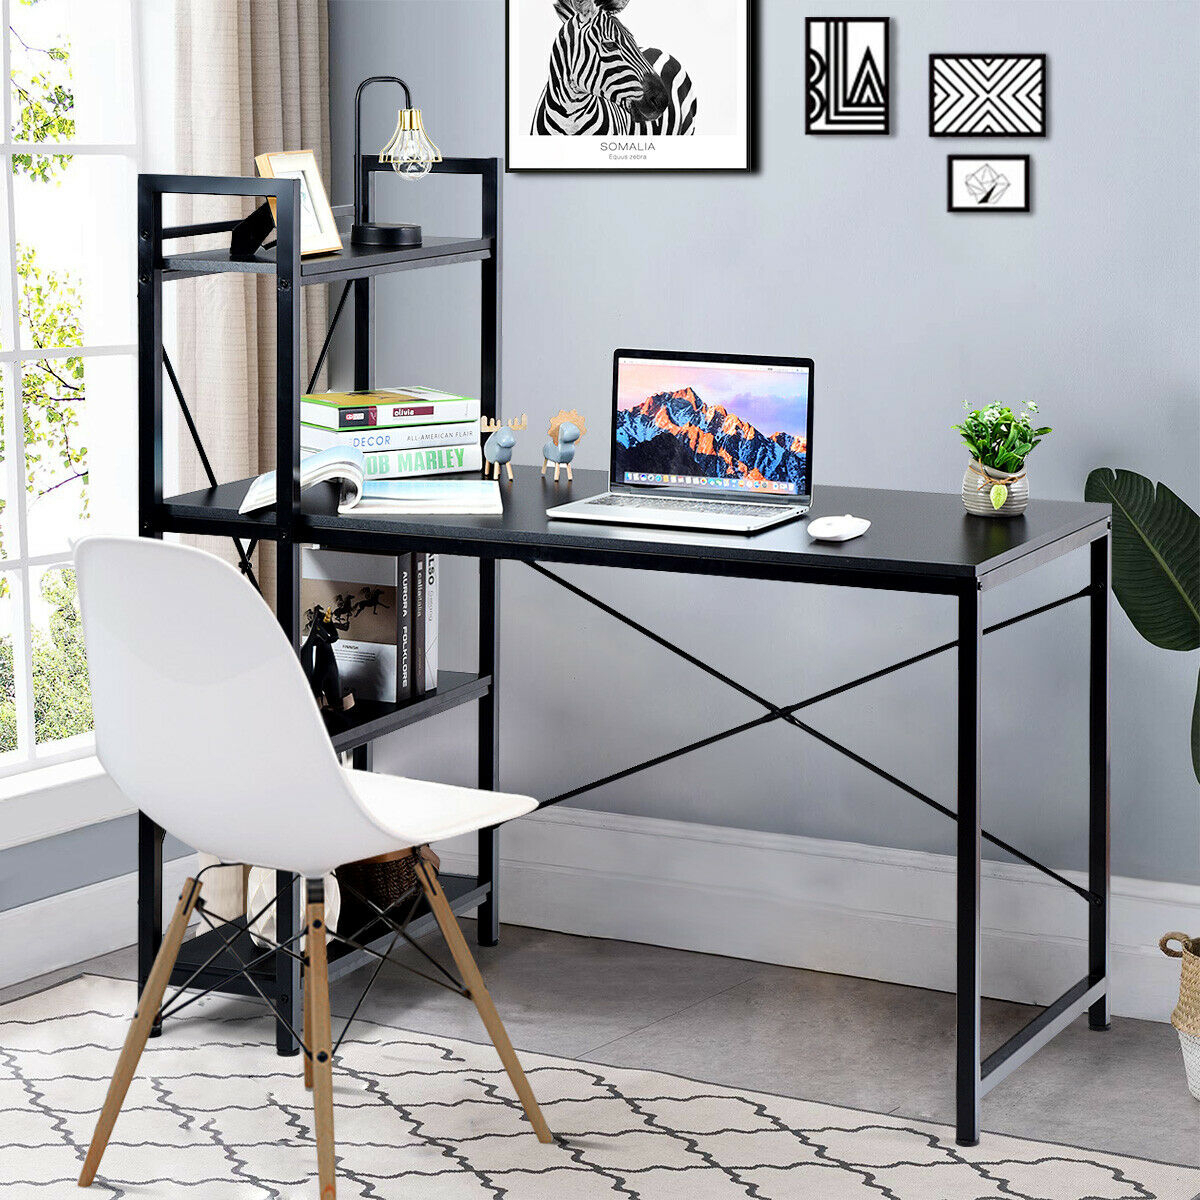 47.5'' Computer Desk Writing Desk Study Table Workstation With 4 Tier Shelves